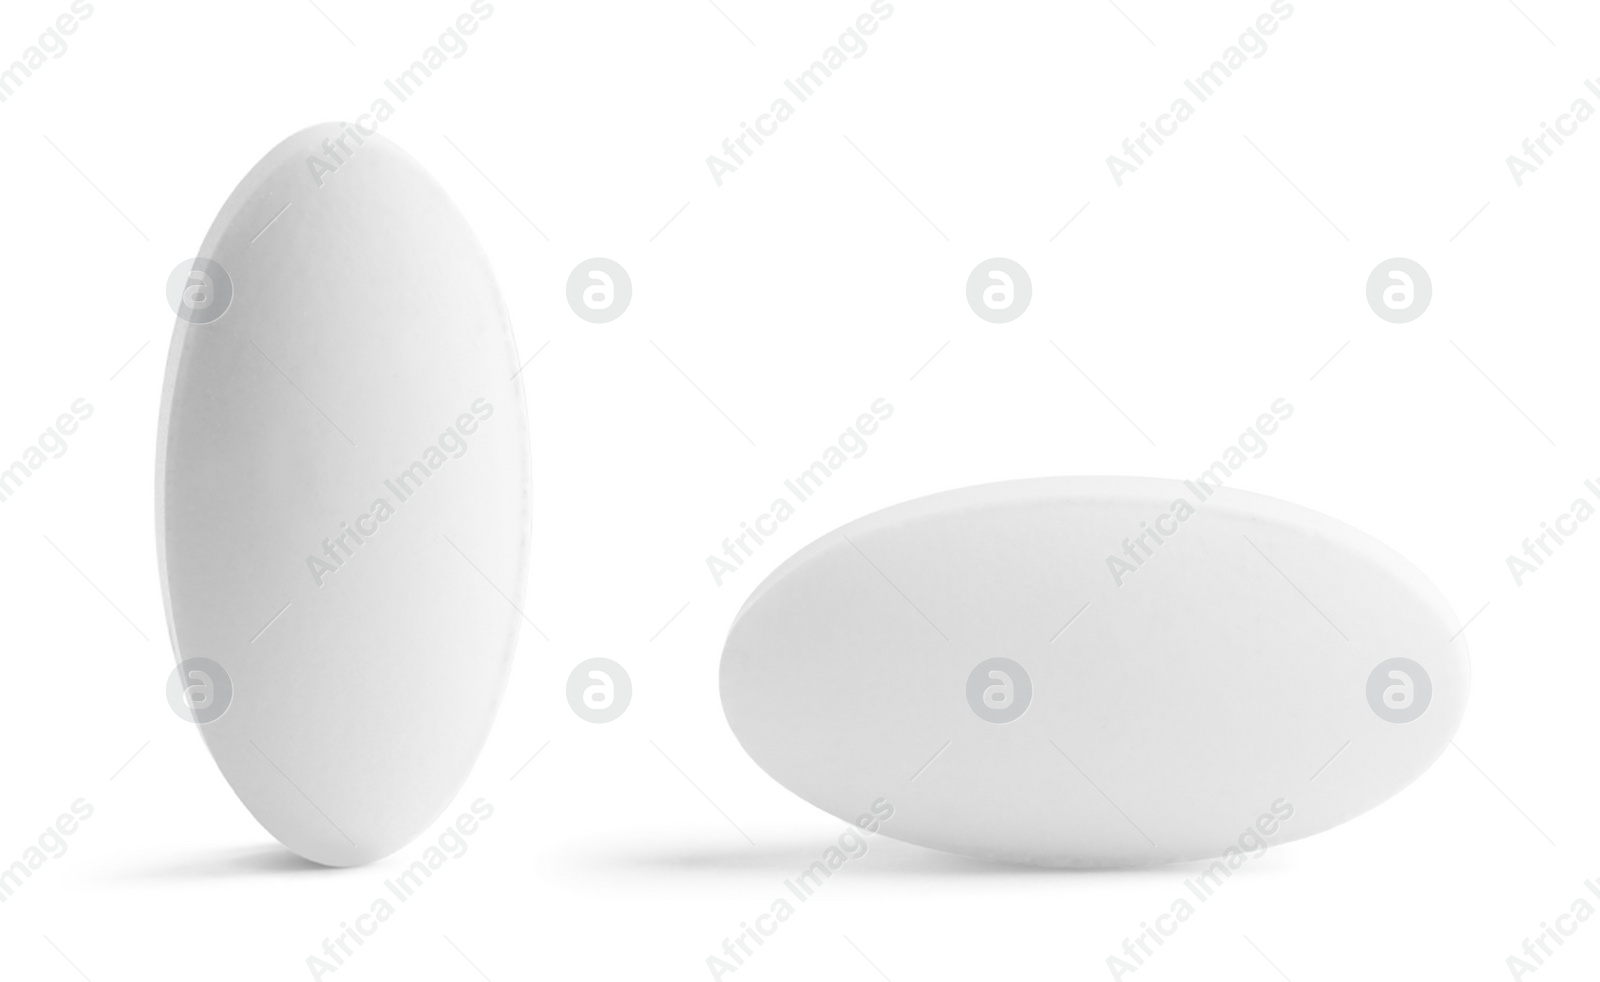 Image of Pill in different positions isolated on white